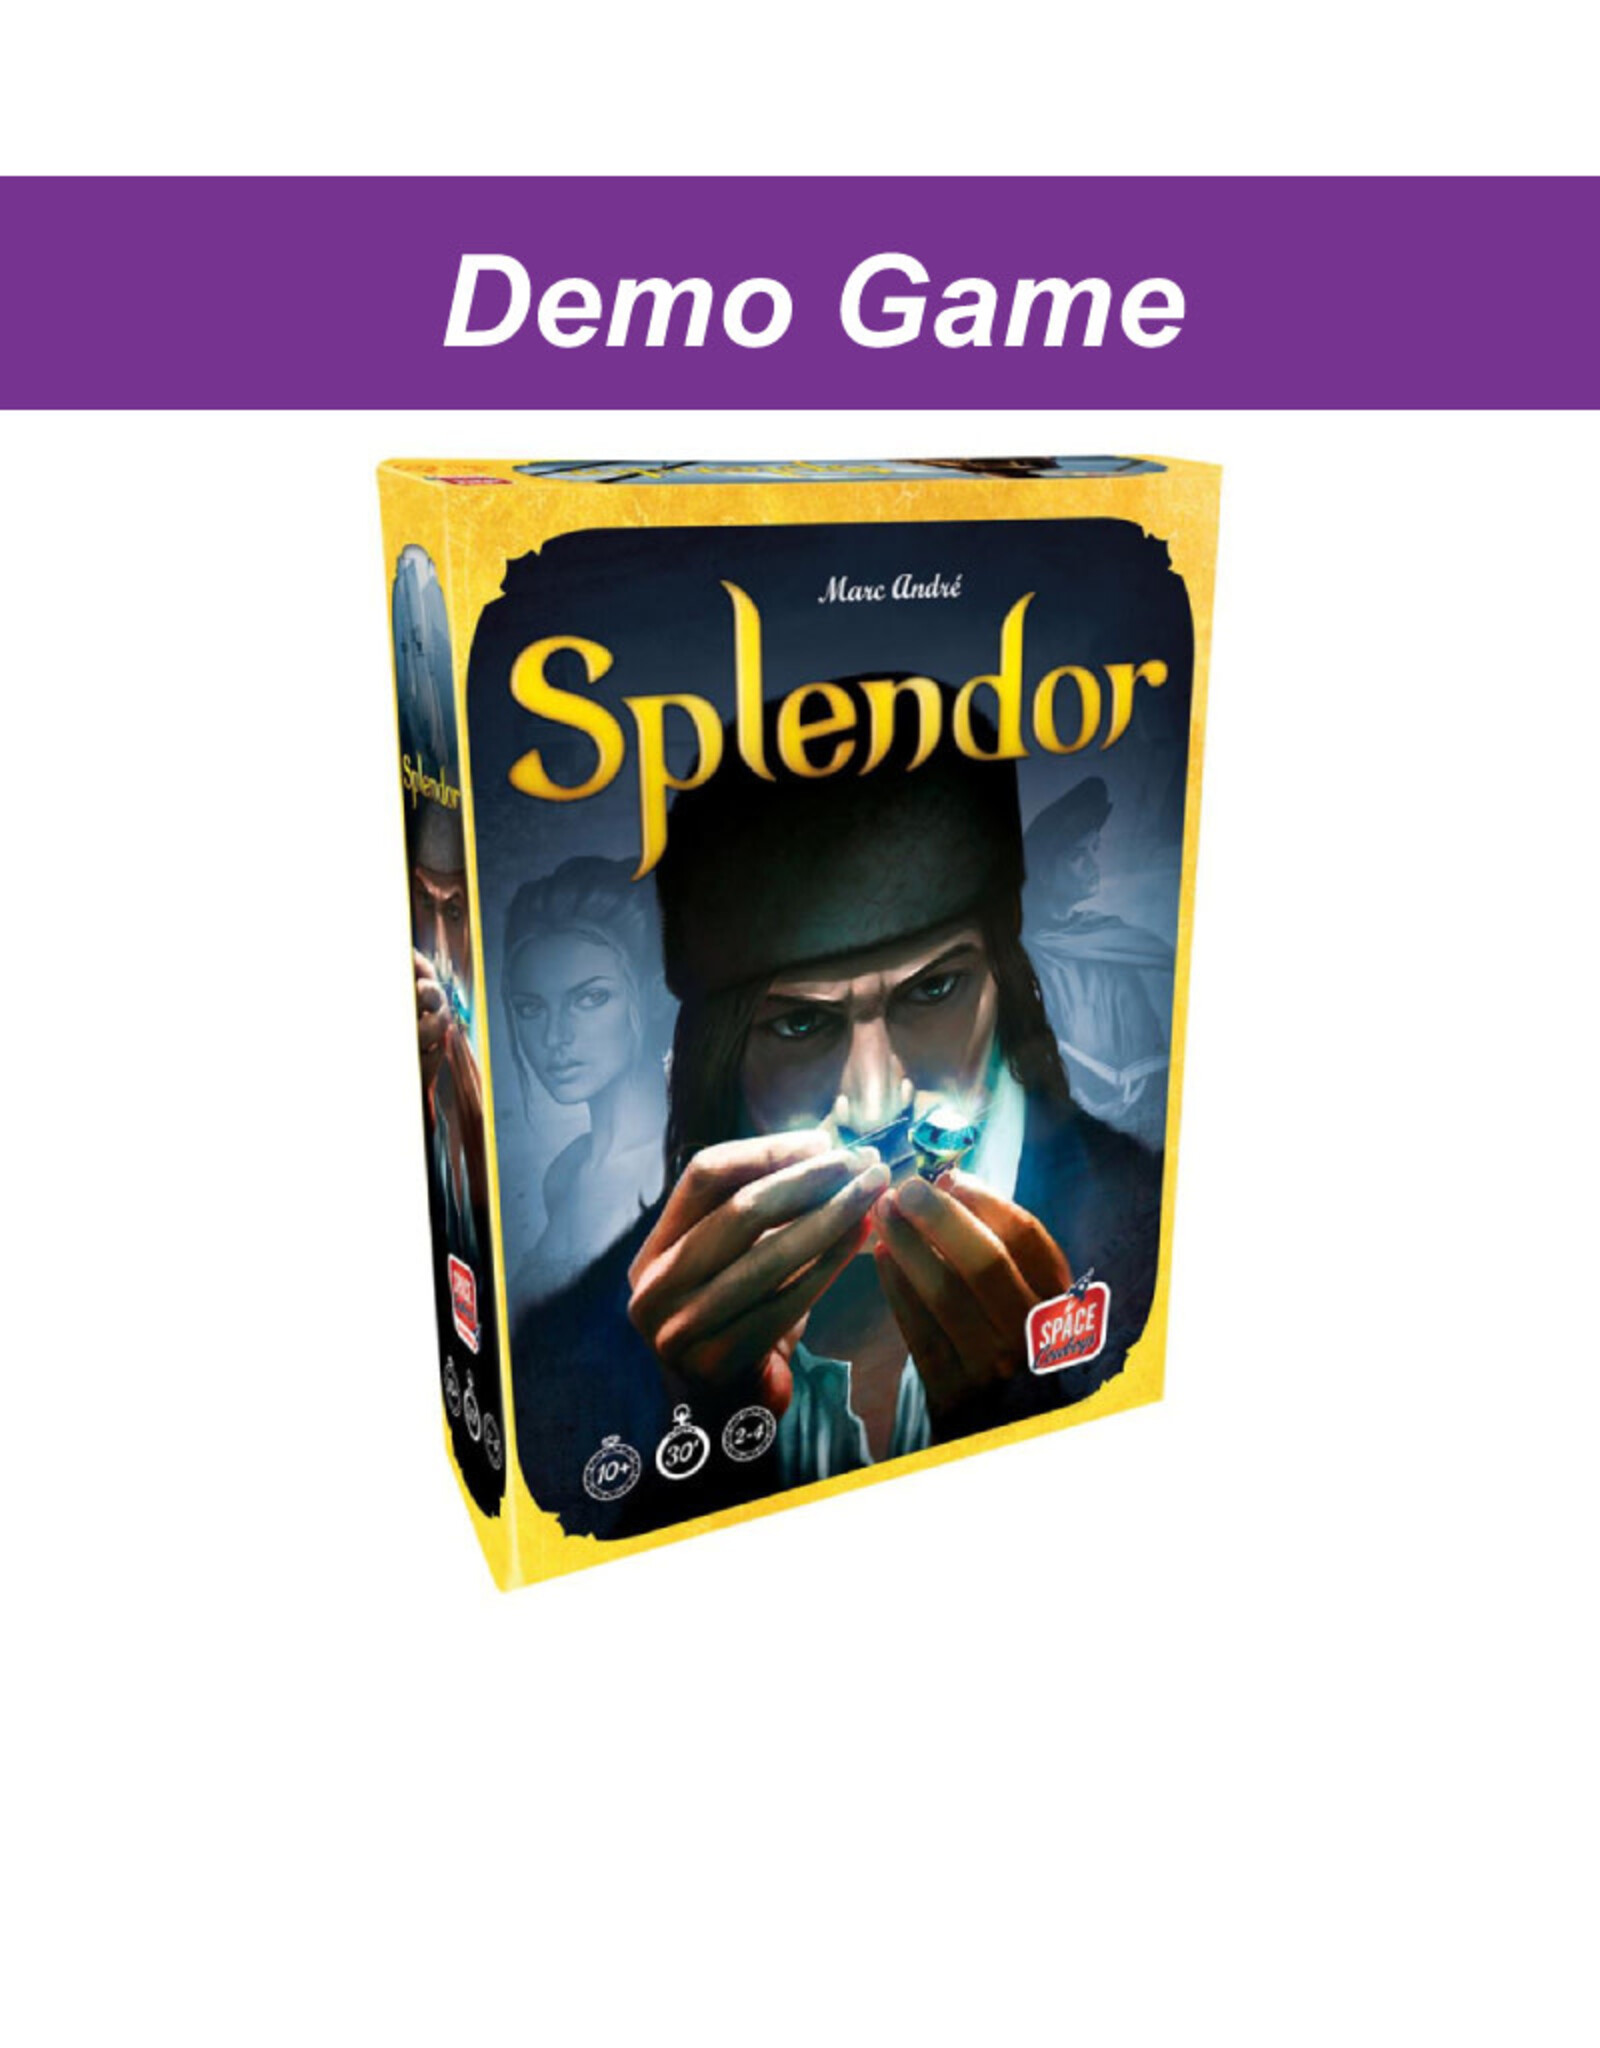 (DEMO) Splendor.  Free to Play In Store!